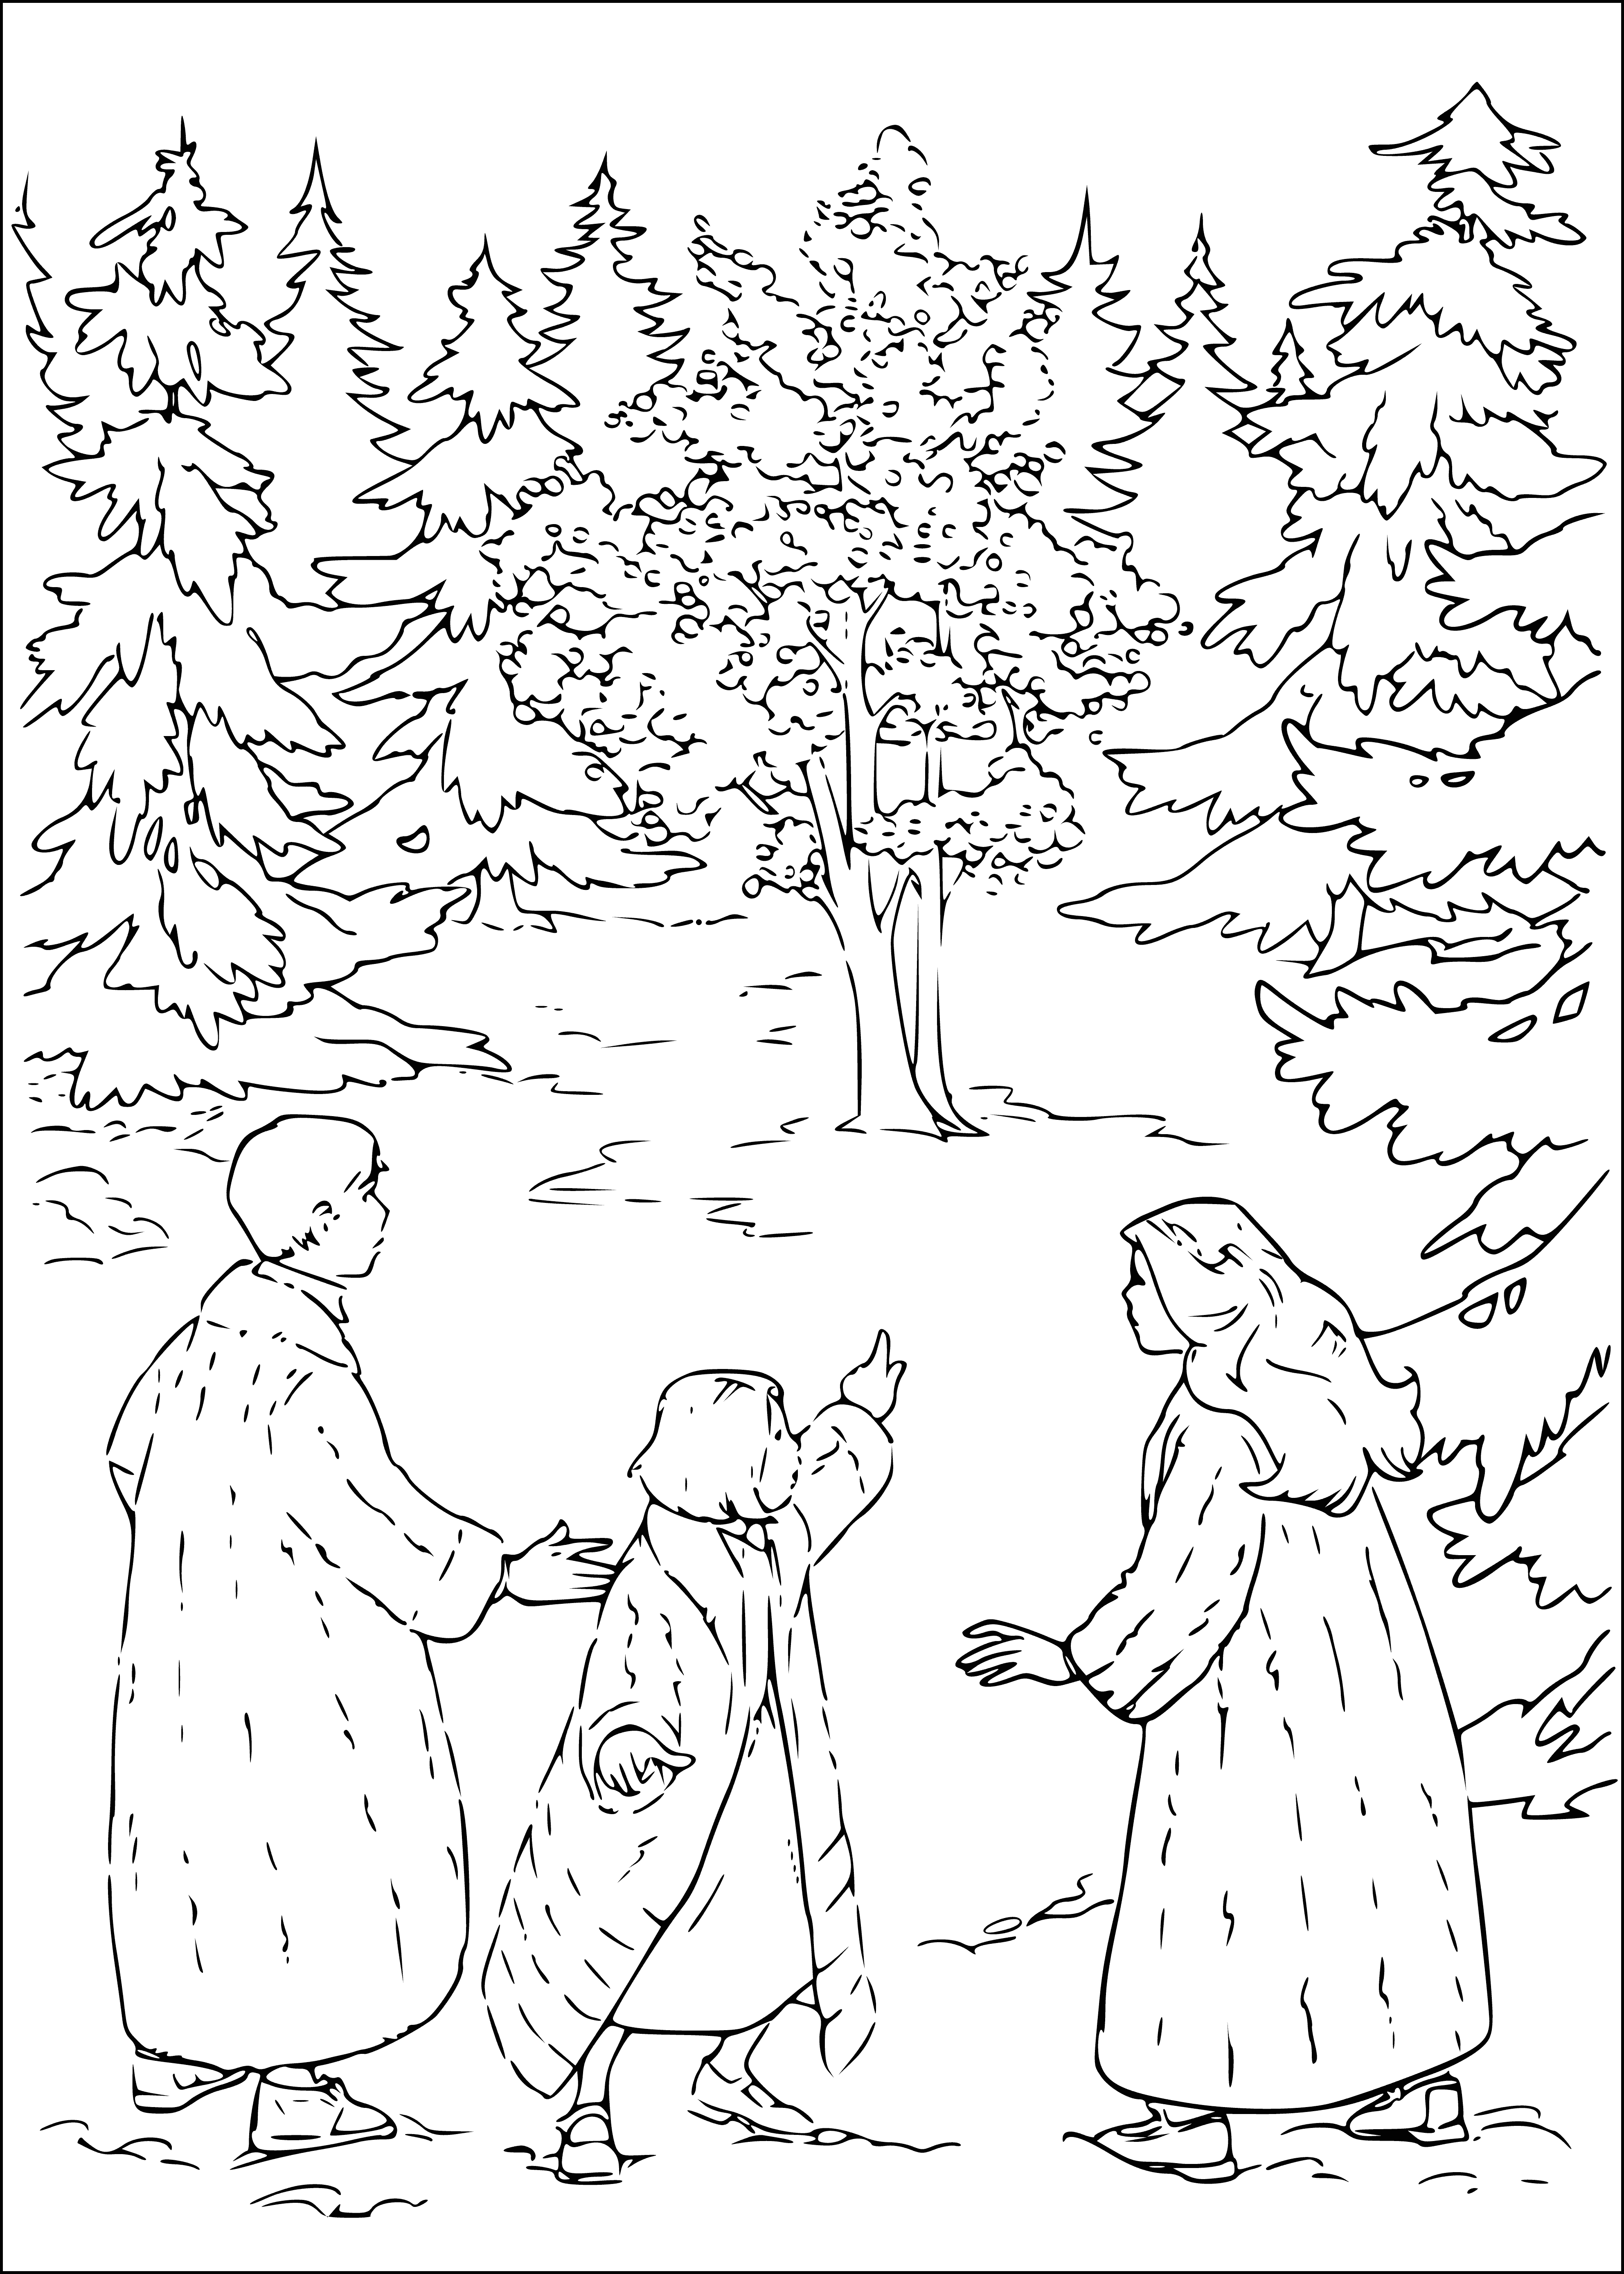 coloring page: The lion, witch and wardrobe are arrayed with the lion looking at witch and witch at wardrobe, holding a magical apple.